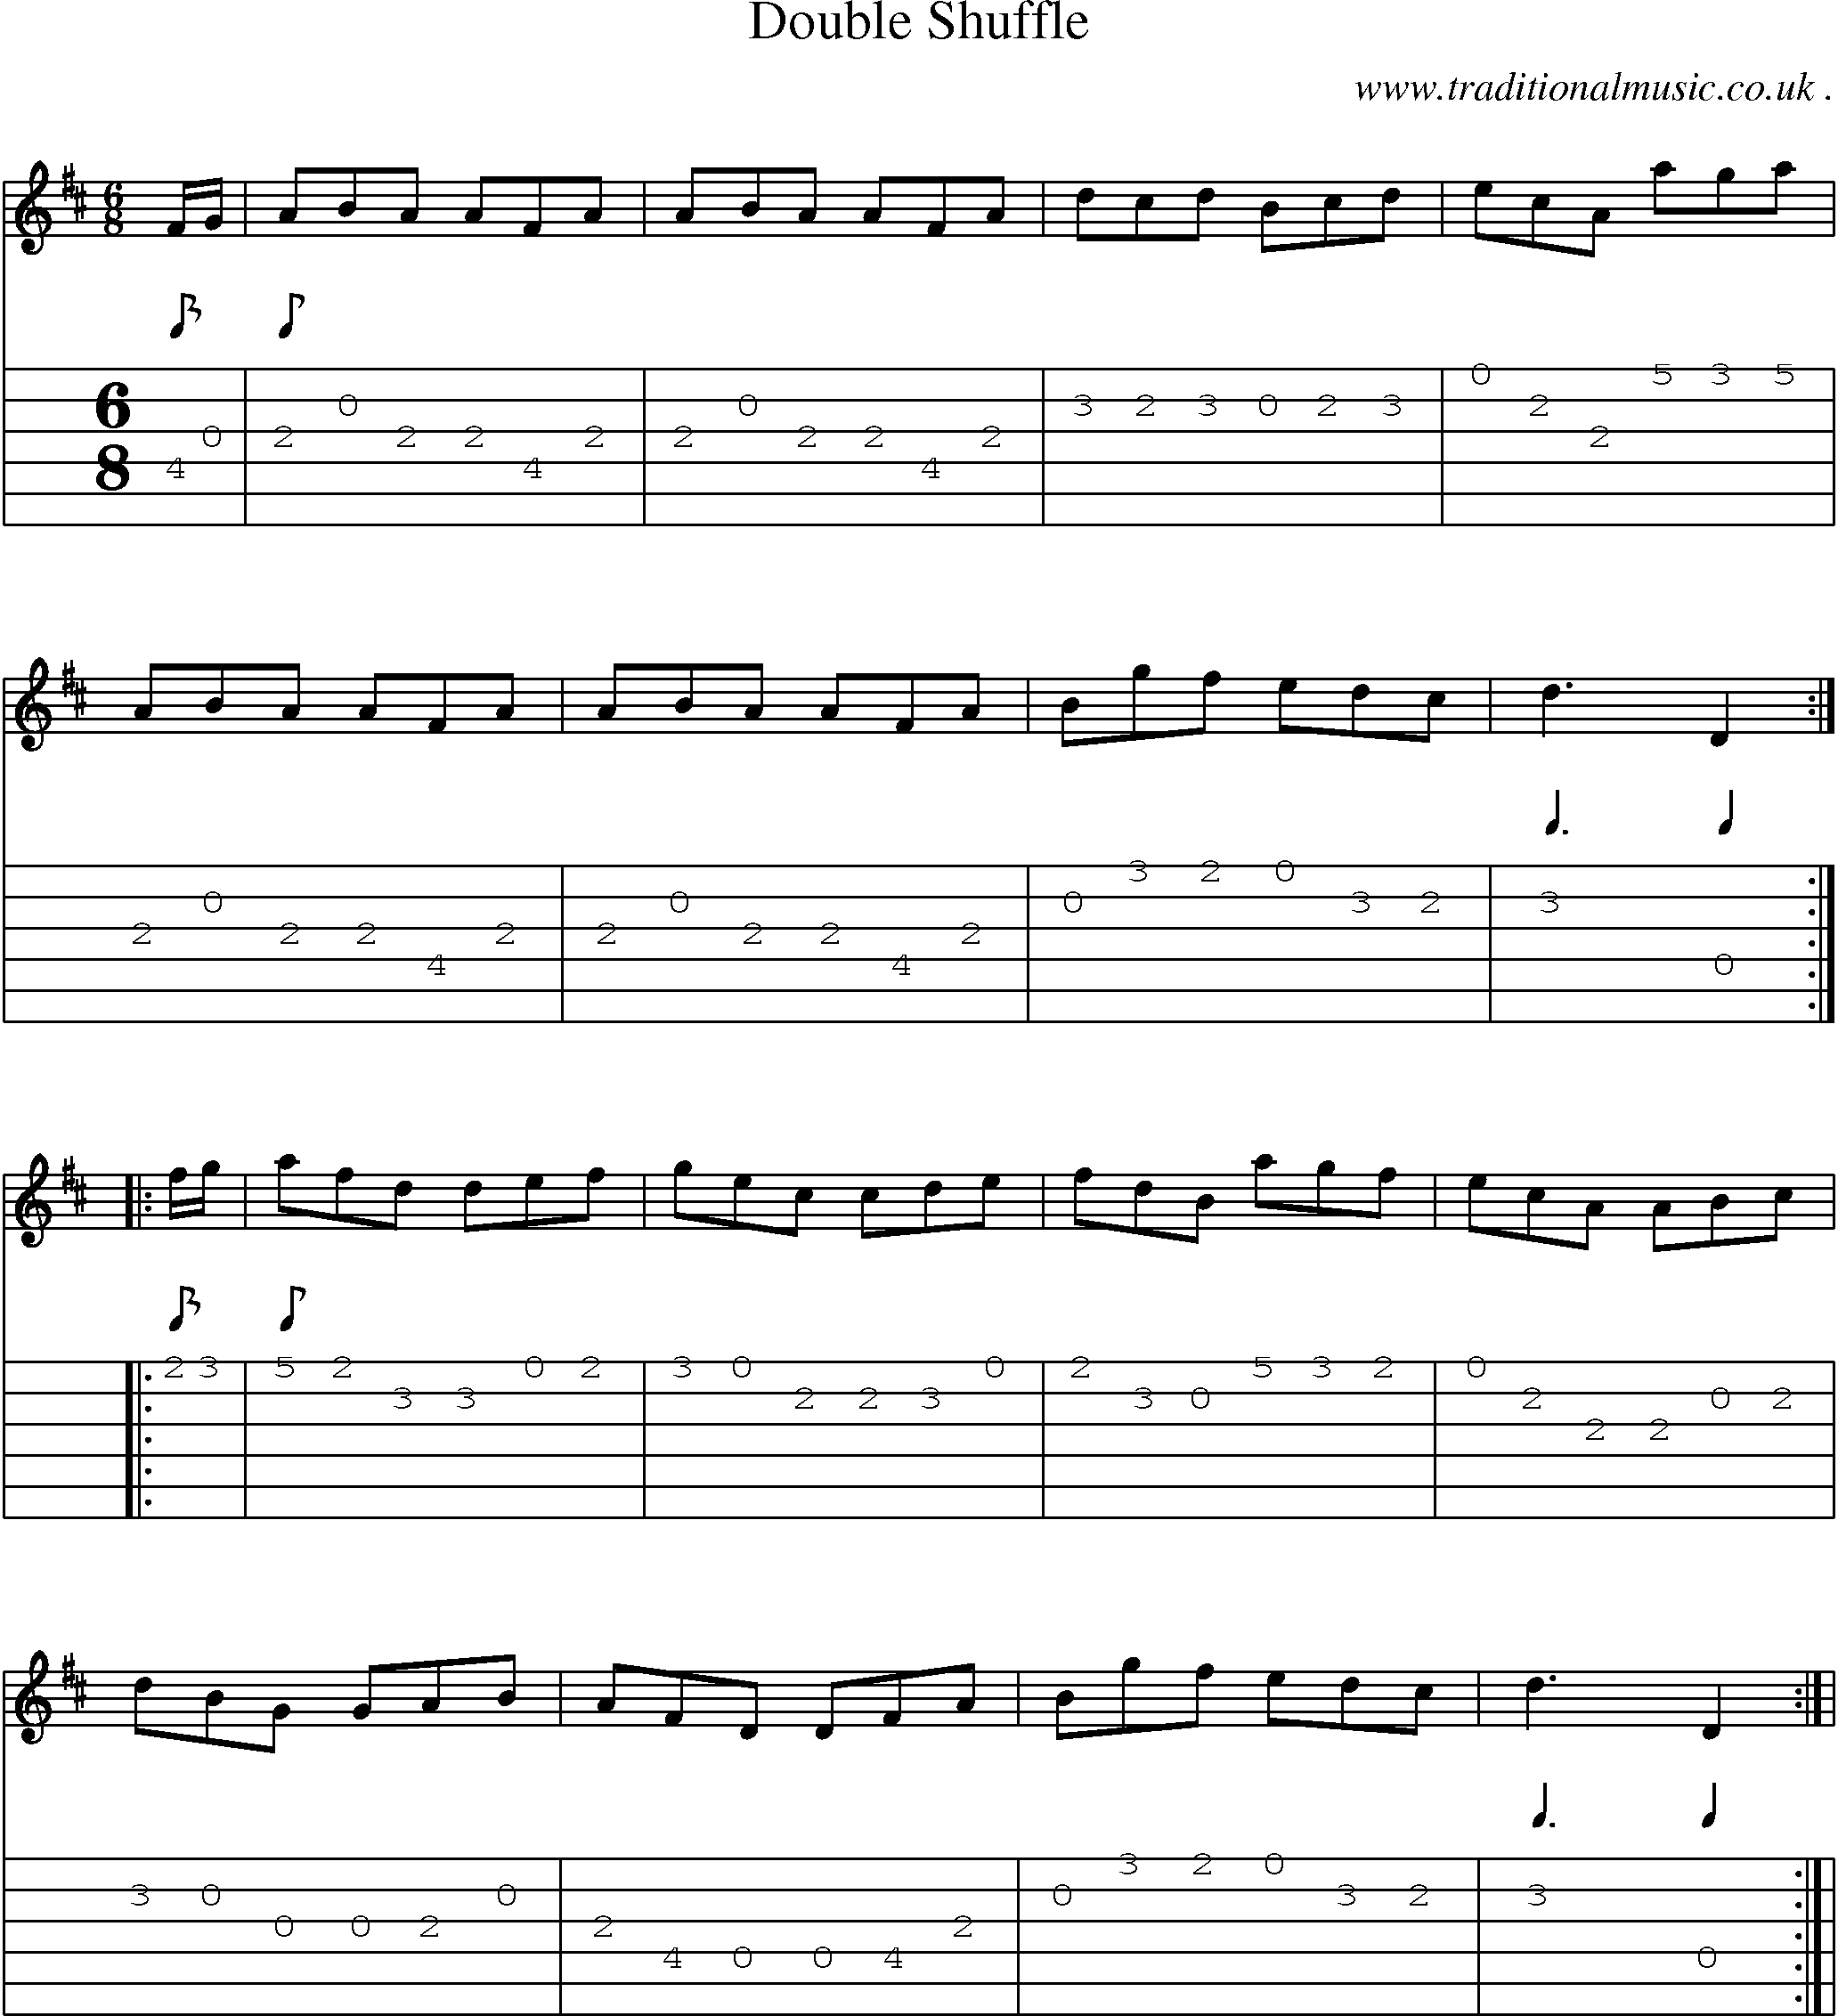 Sheet-Music and Guitar Tabs for Double Shuffle